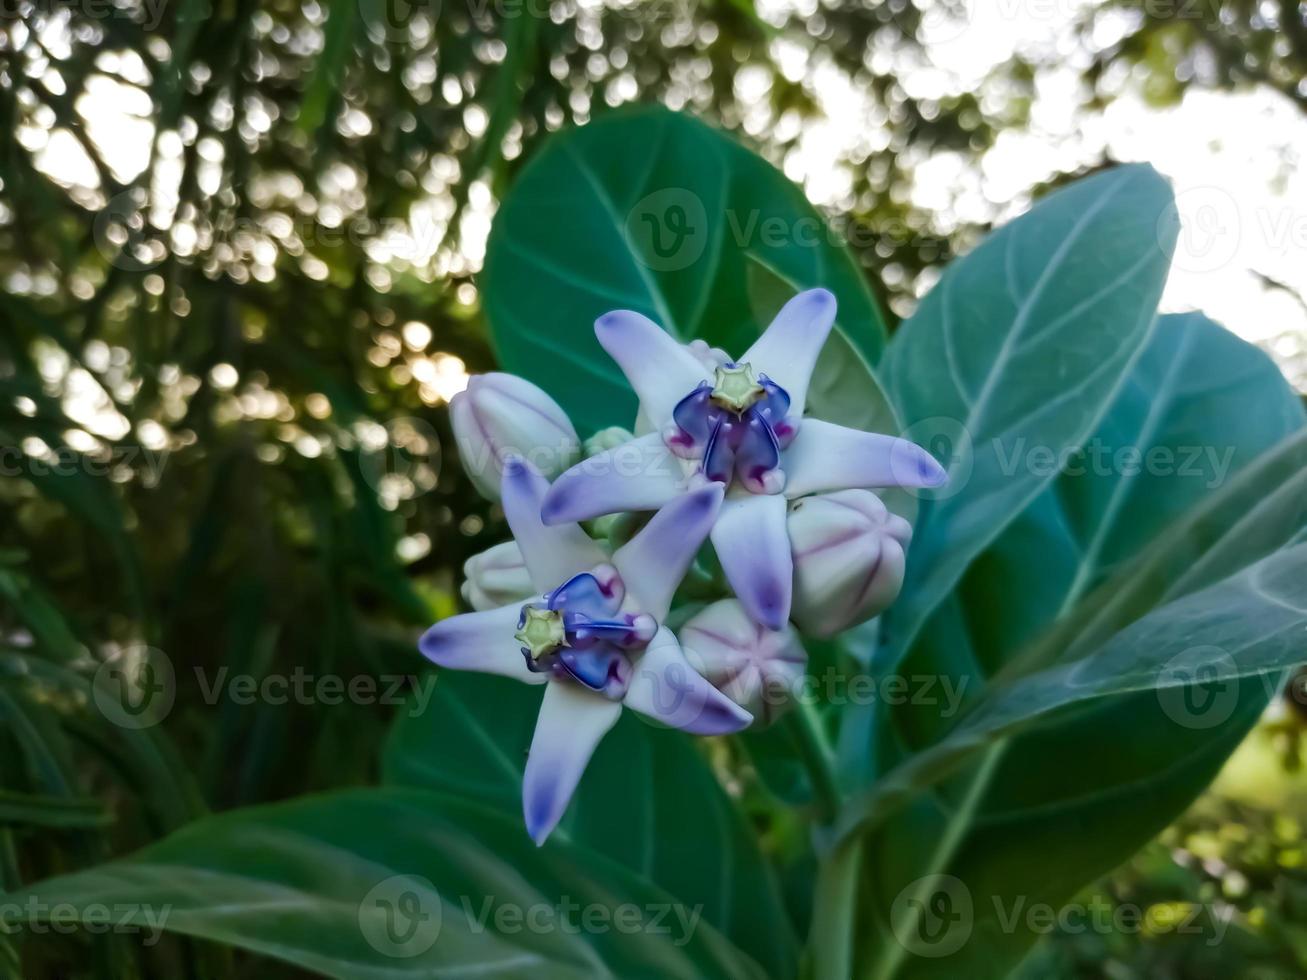 Close view of Purple Crown flower or Giant Indian milkweed on natural background. Calotropis gigantea. Medicinal plant. photo